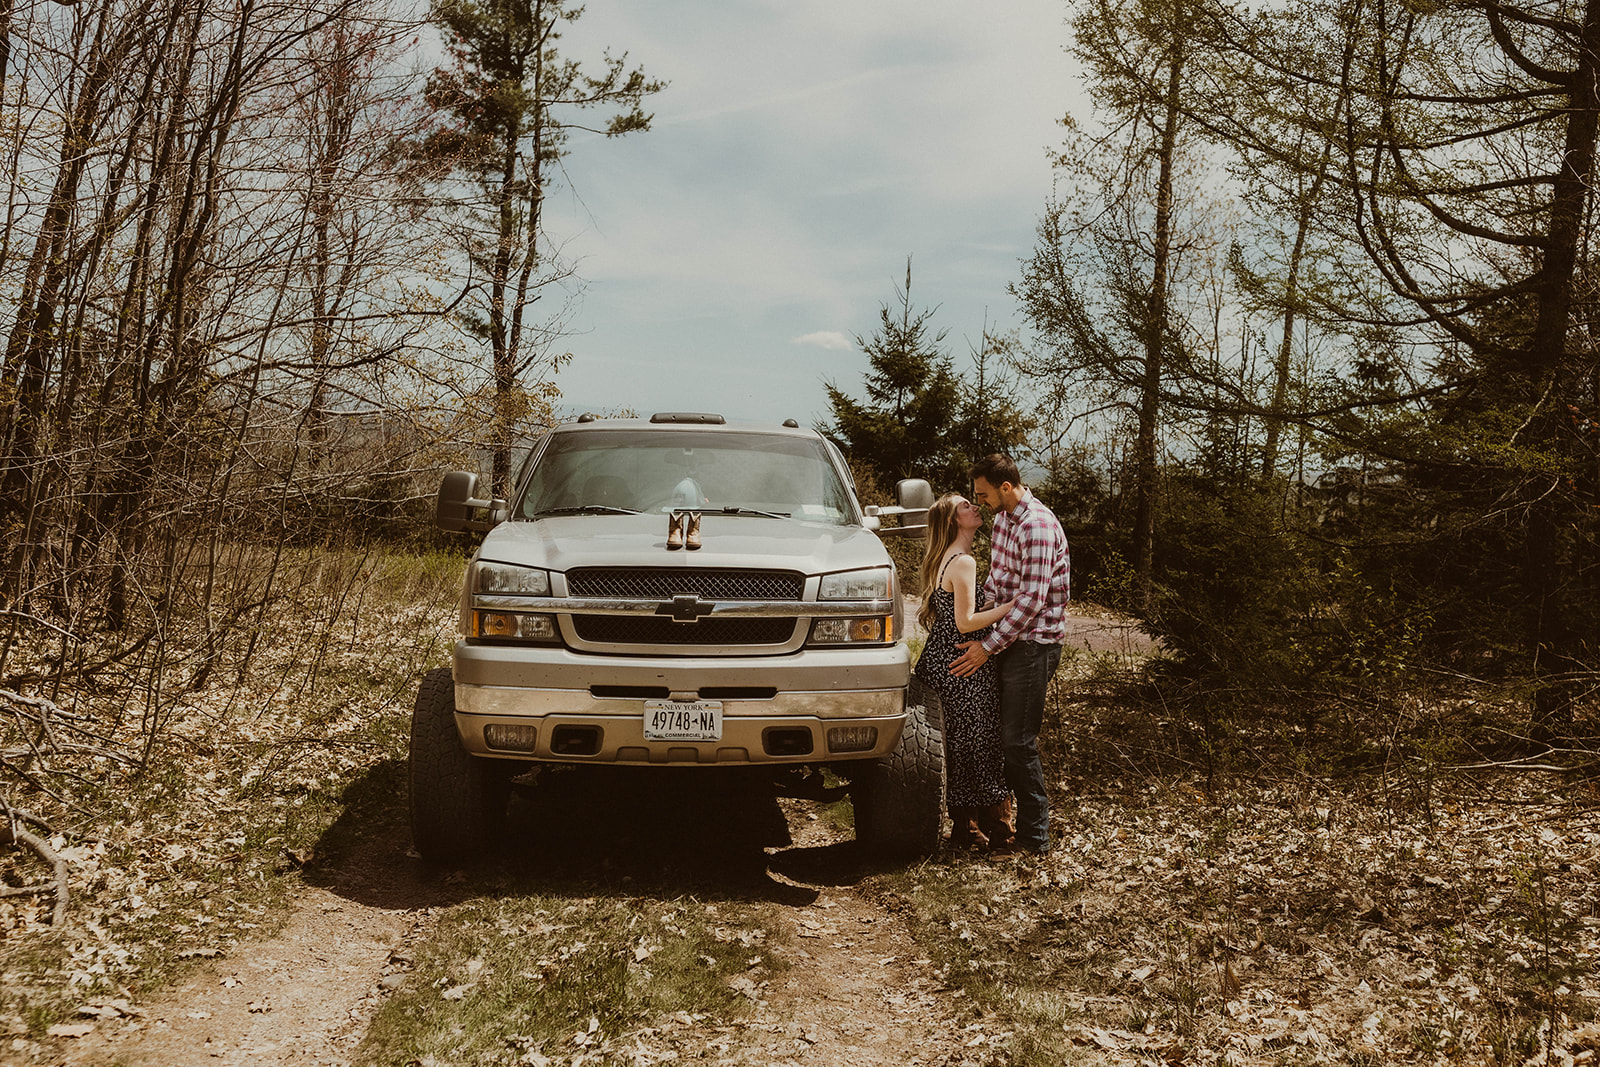 Future parents pose intimately with their truck together during their western maternity photos